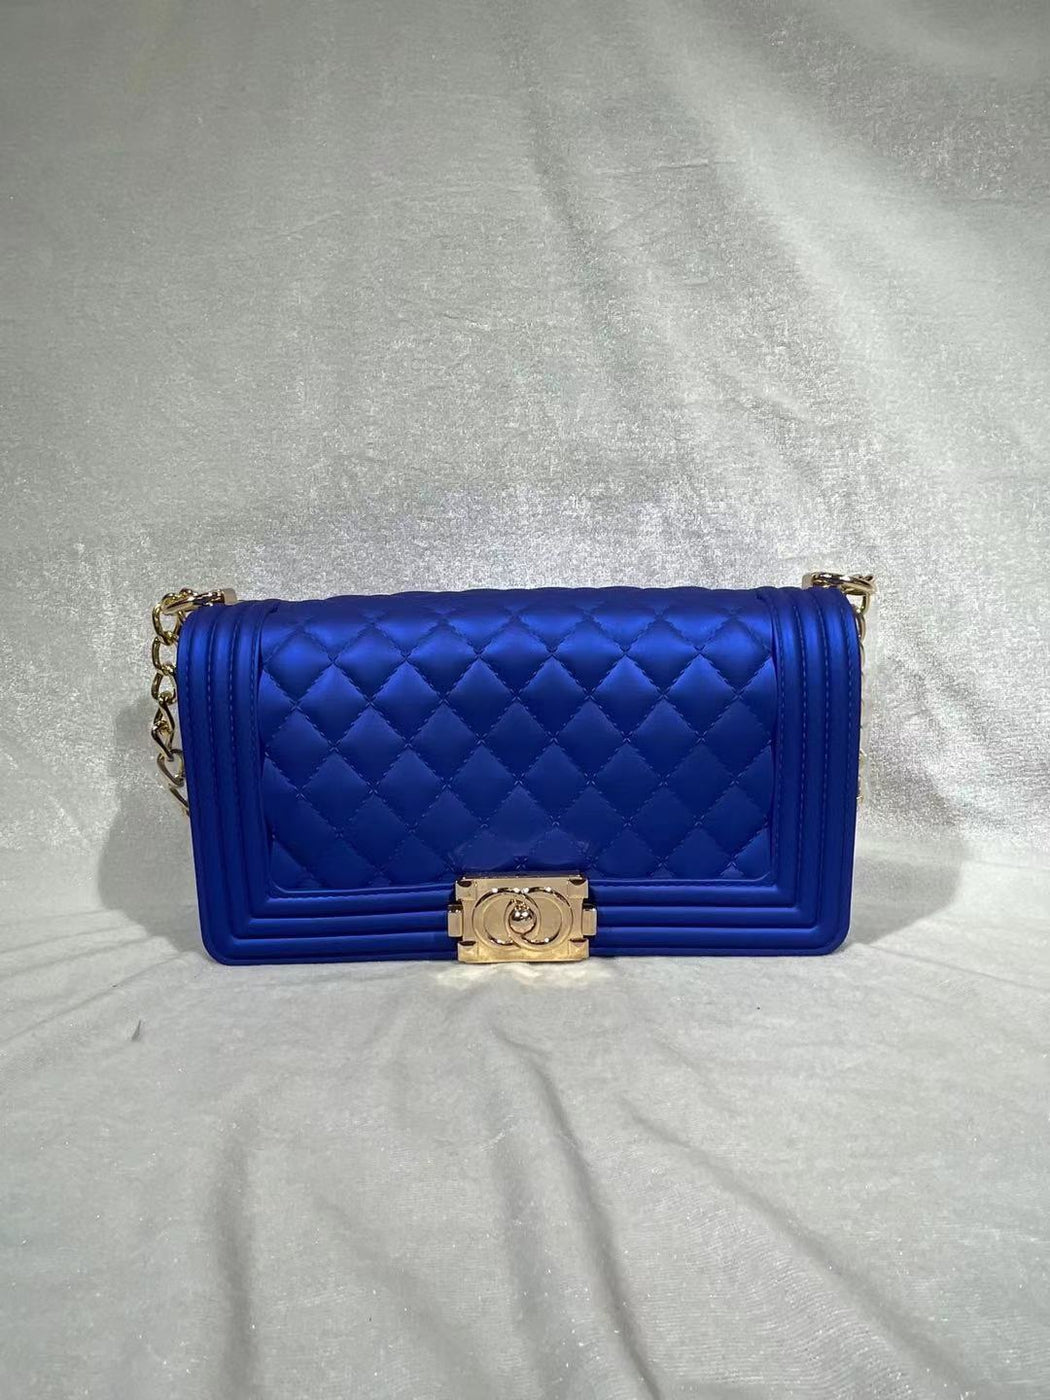 "Abigail" Quilted Jelly Handbag